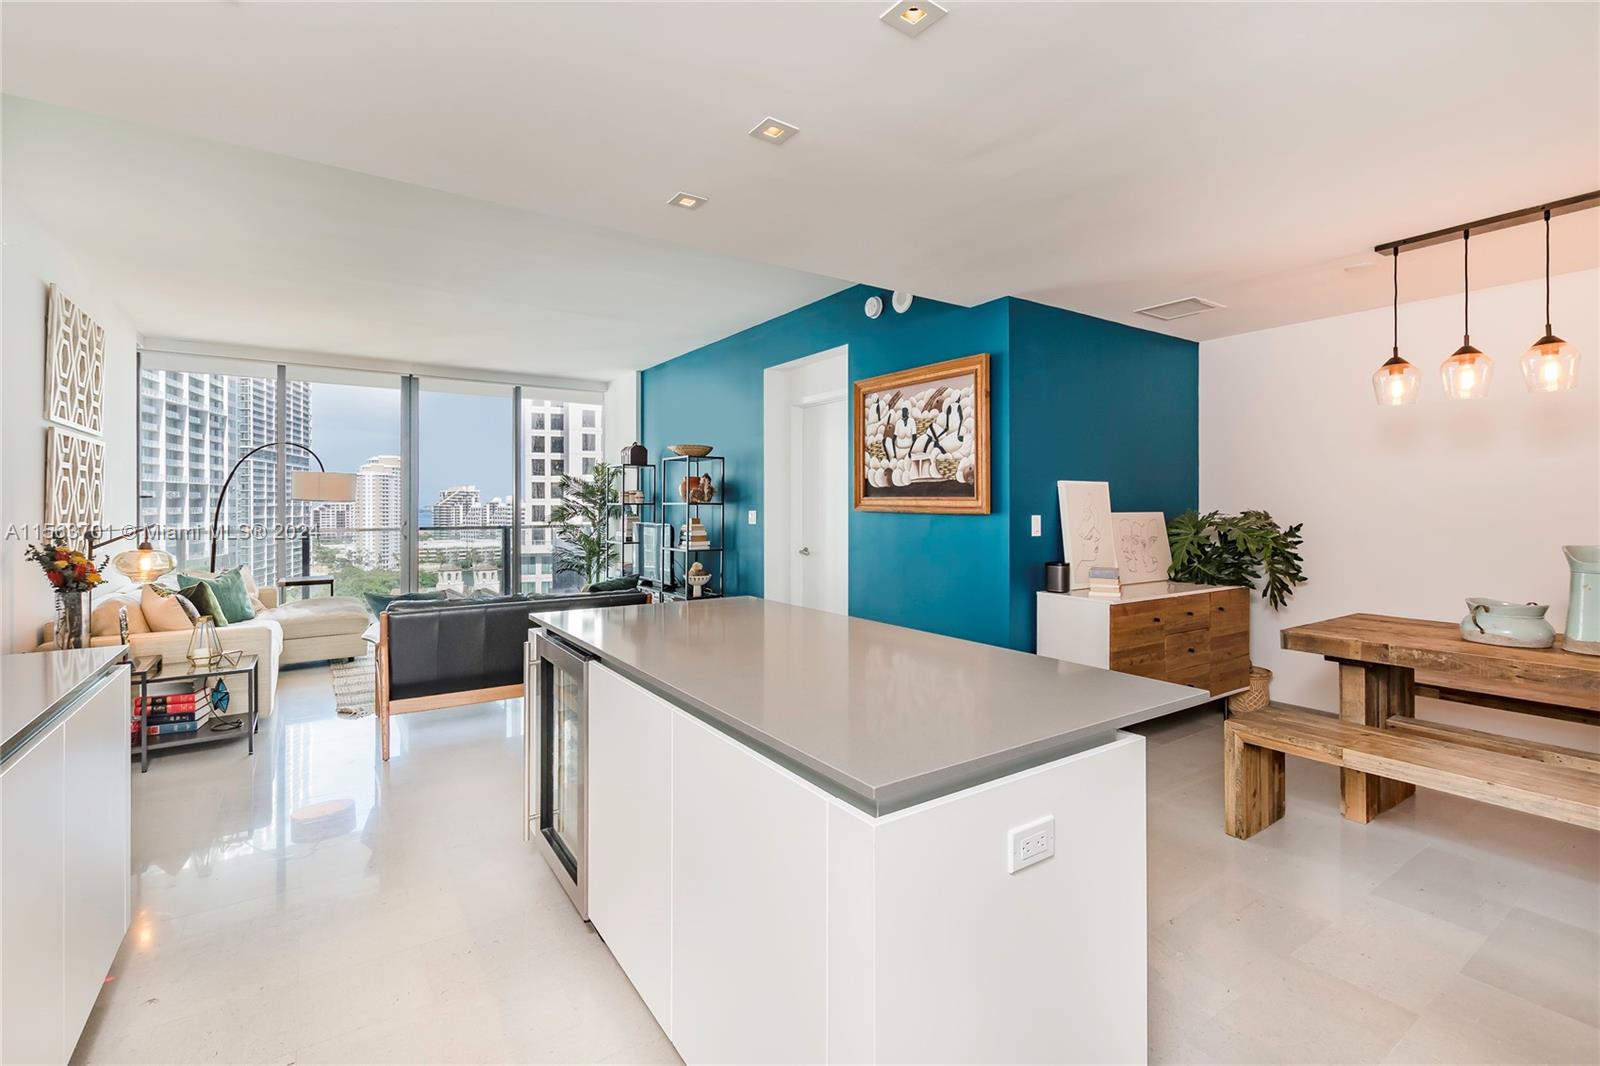 Welcome to this spacious 2 bed 2.5 bath, 1,400 SF Unit in the heart of Brickell. This property is turn-key and offers top-of-the-line
finishes, featuring a spacious balcony that overlooks the city. Enjoy great amenities such as a fitness center, infinity swimming pool,
24/7 concierge, kids’ playground, covered parking, and valet right in the building. Ideally located in Brickell City Center, steps away
from Luxury shopping, Dining and entertainment.